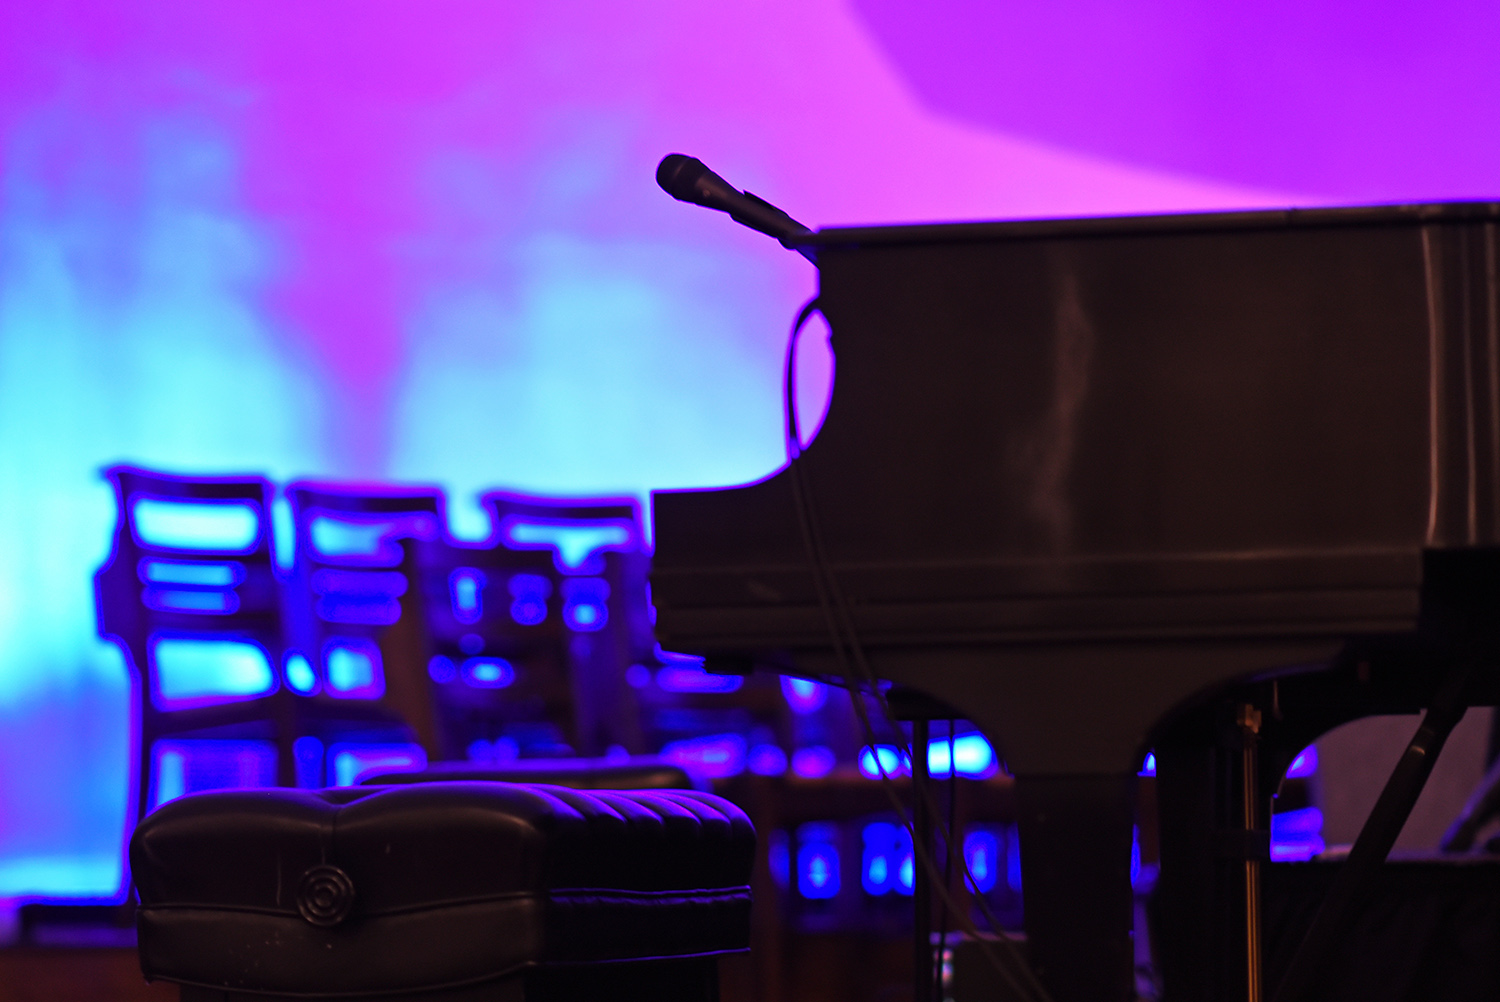 Piano_Microphone_Soft_Focus_Stage_Lighting_Magenta_Blue_Chairs.jpg